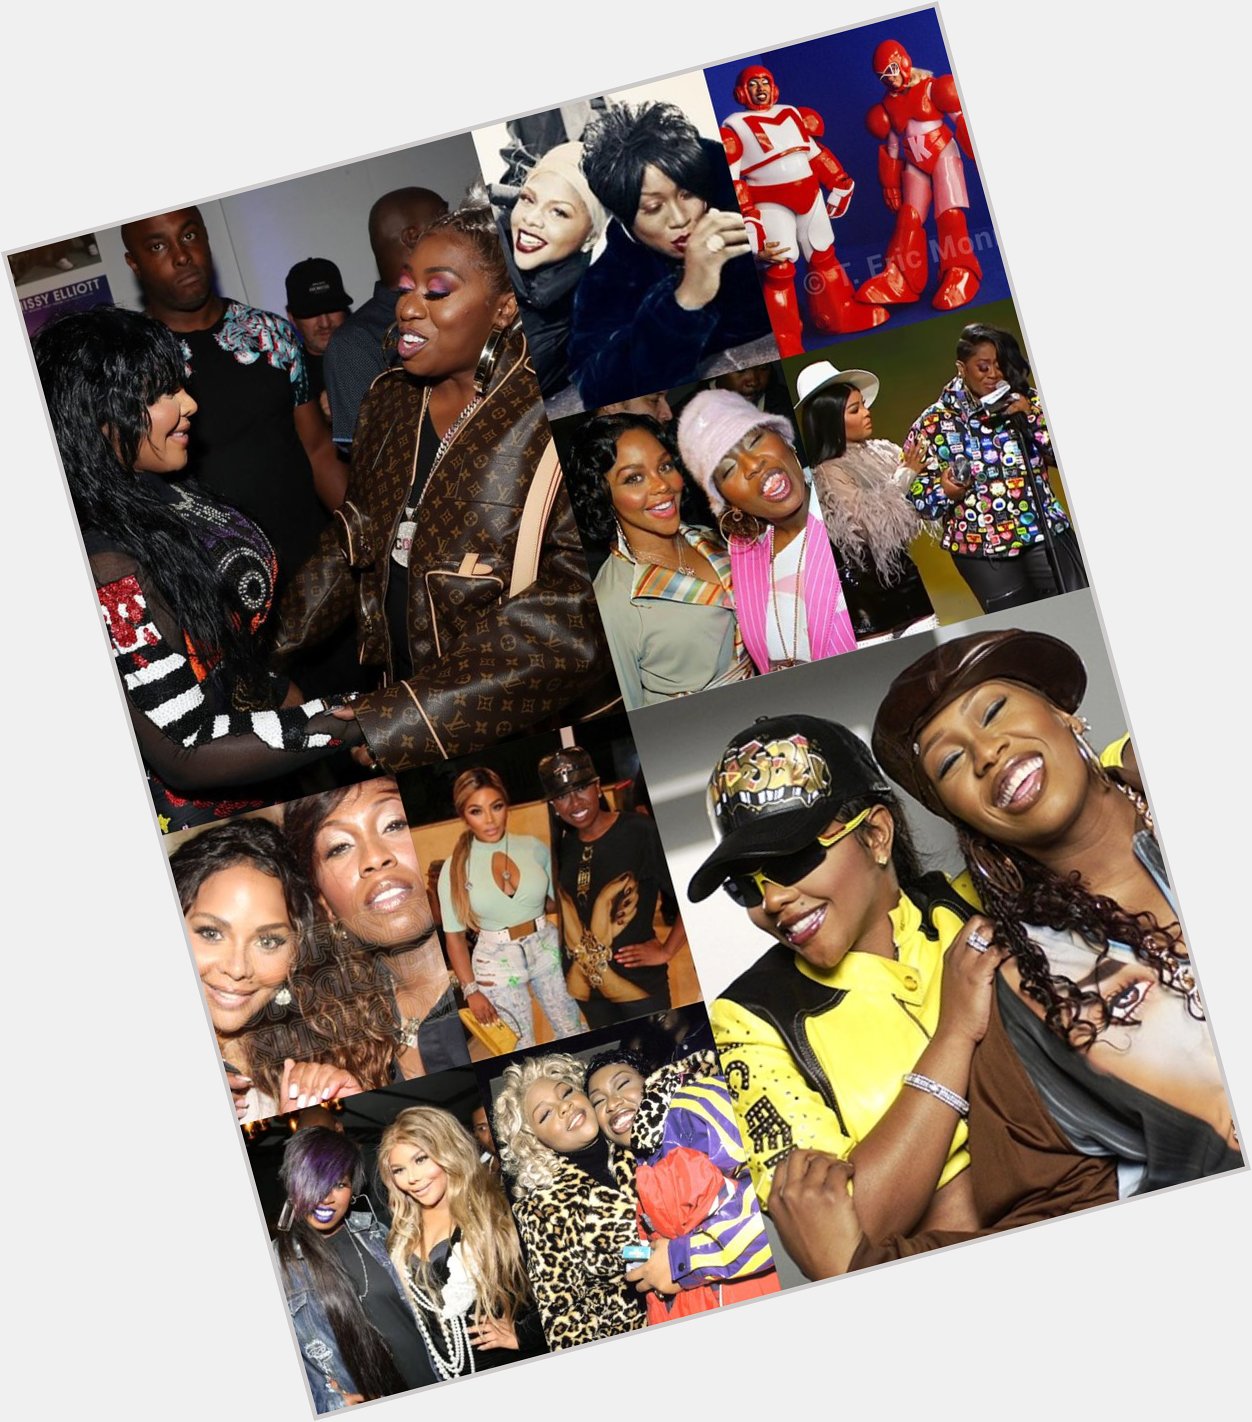 Happy Birthday to the ICONIC, LEGENDARY, BEAUTIFUL SOUL MS MISSY ELLIOTT! We love you so much   